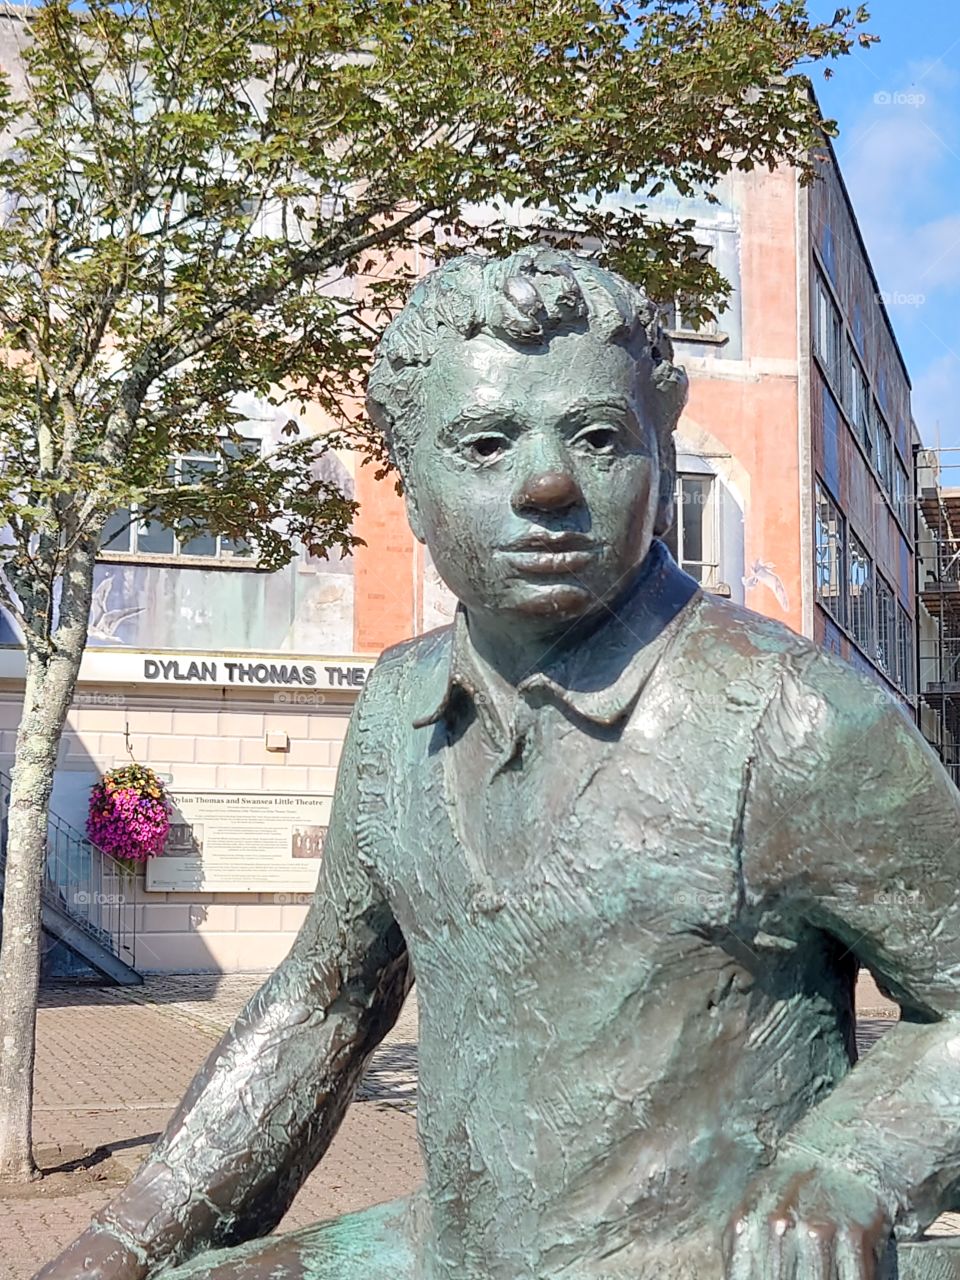 Dylan Thomas statue in Swansea